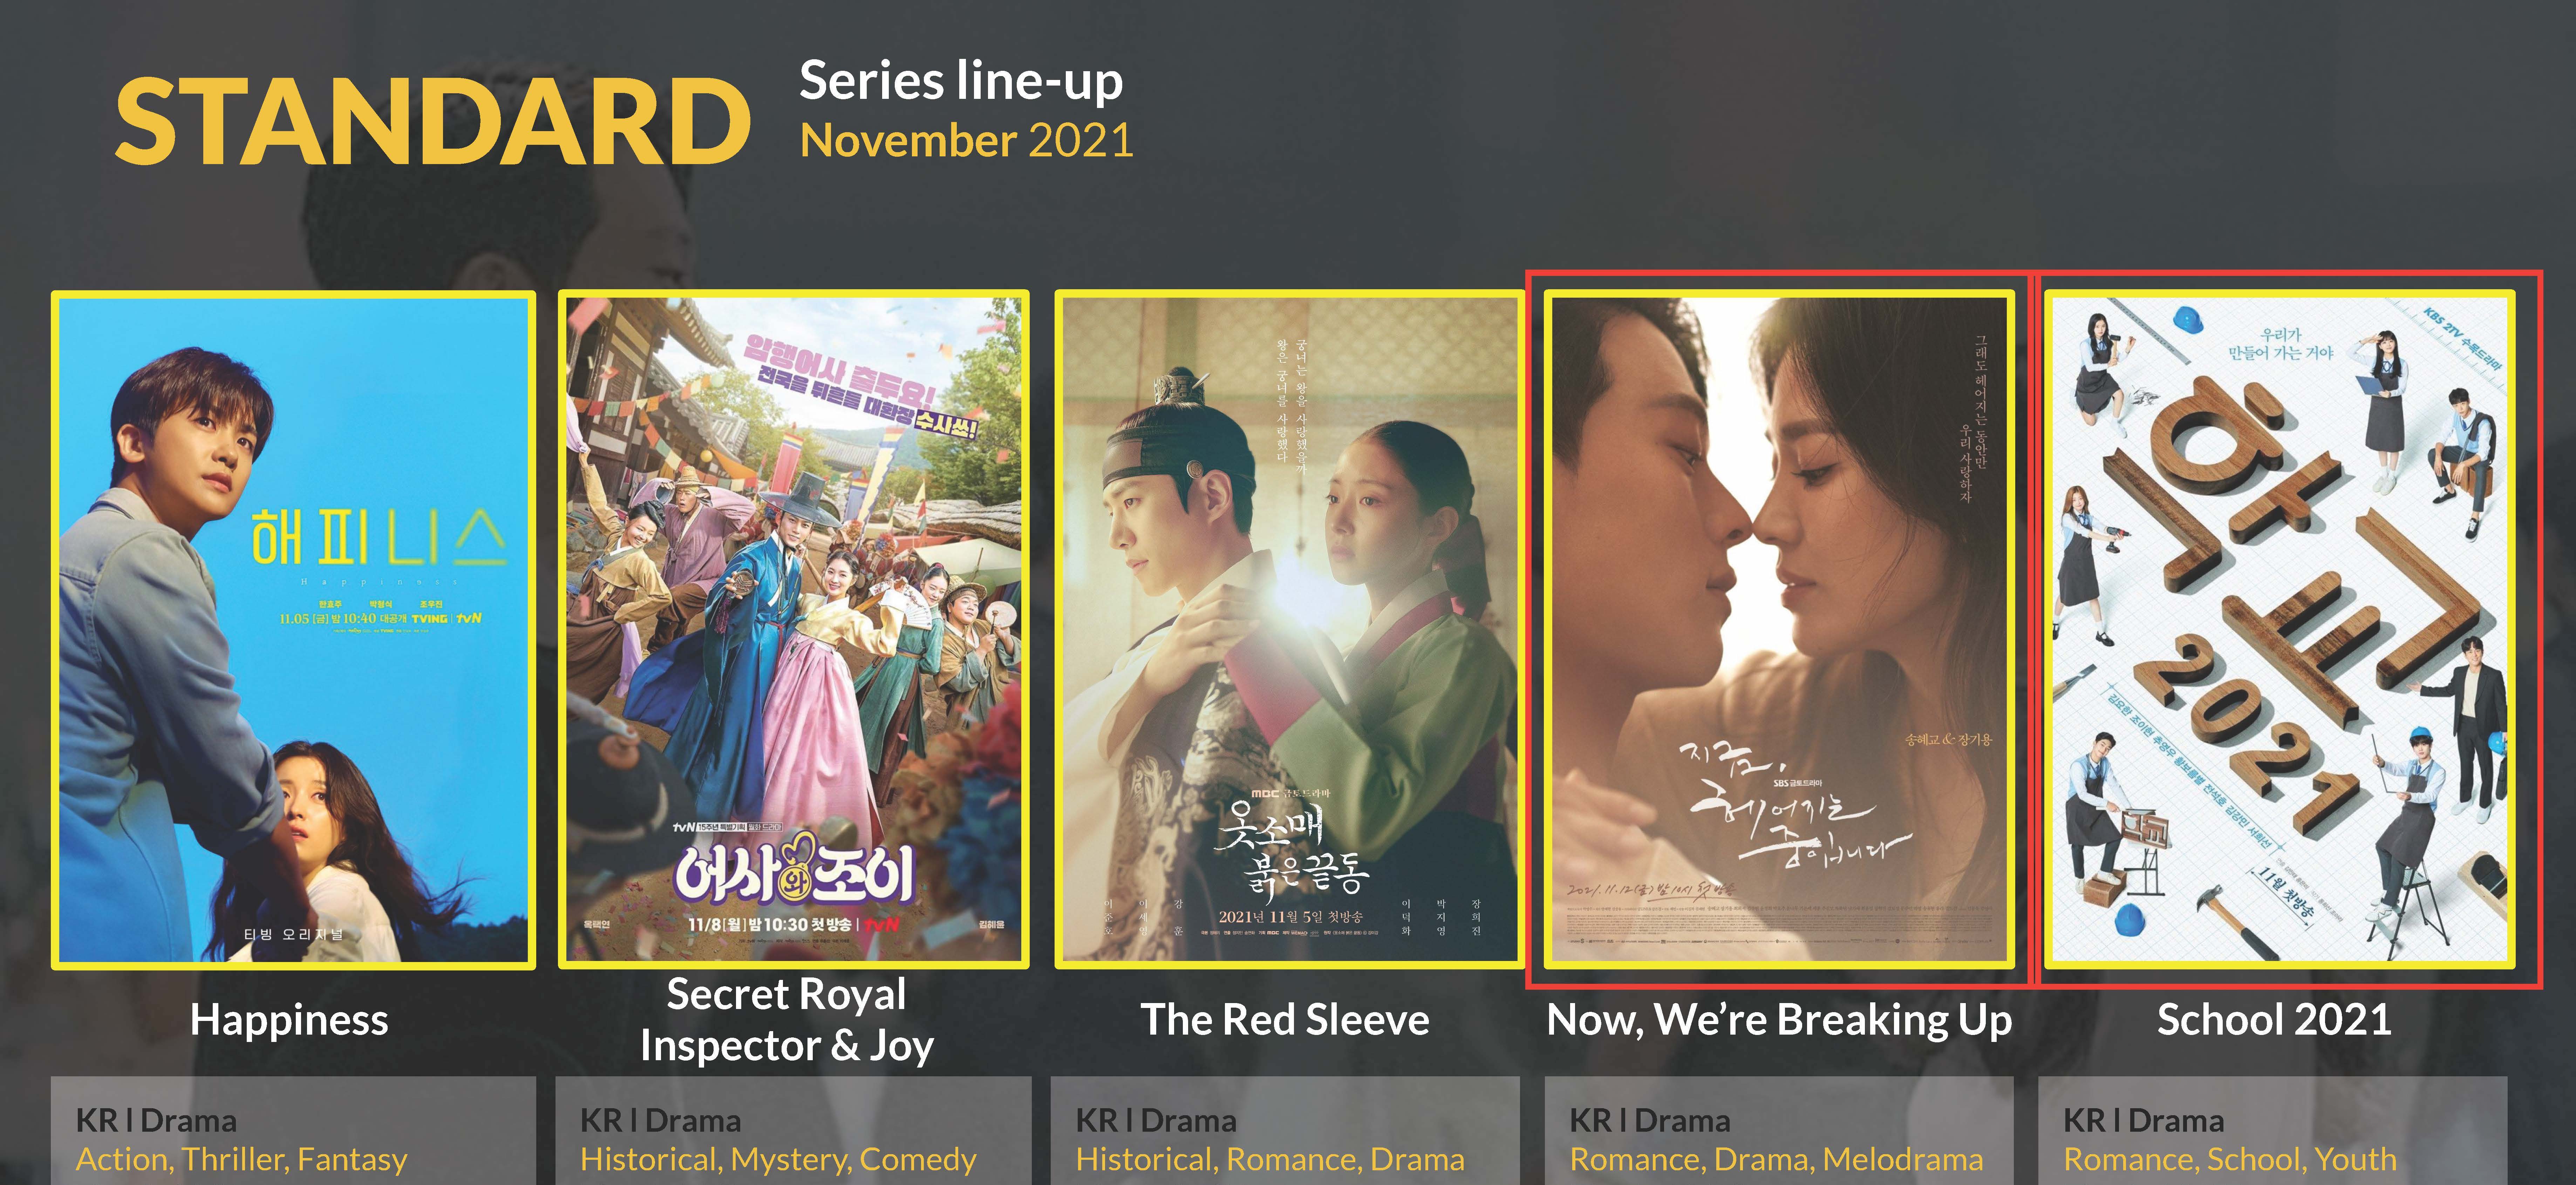 Look Out for These New Hot Korean Dramas on Viki This November